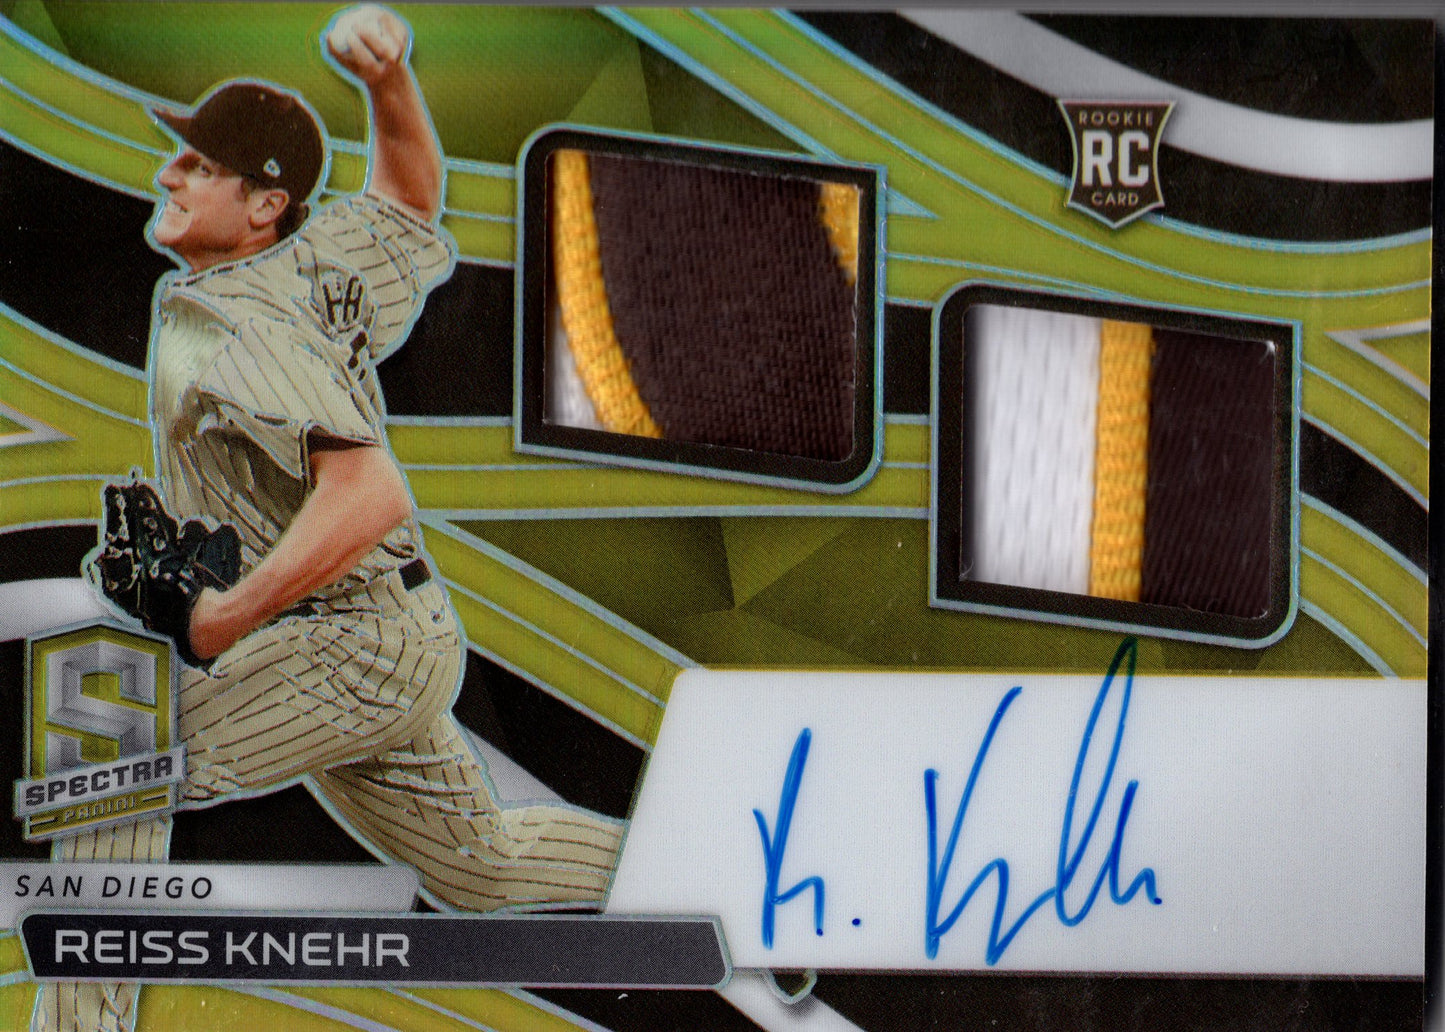 2022 Panini Spectra Reiss Knehr Gold Duo Patch RC Auto 2/10